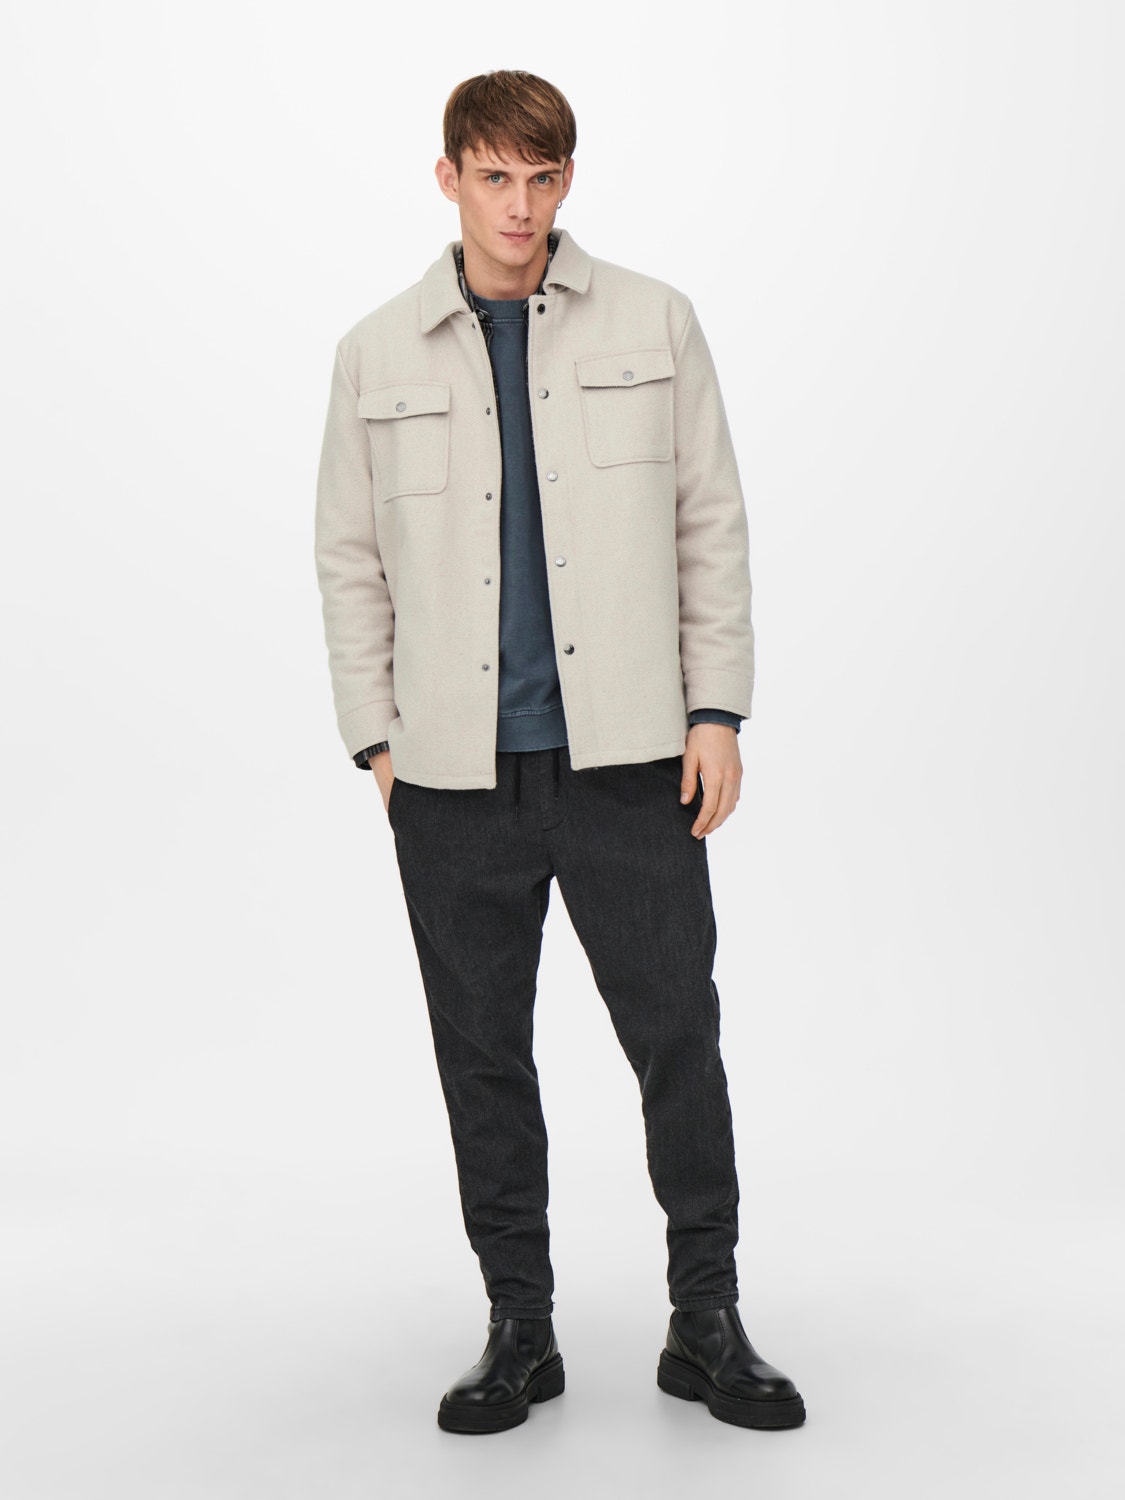 ONLY & SONS Jacket -Pelican - 22021183